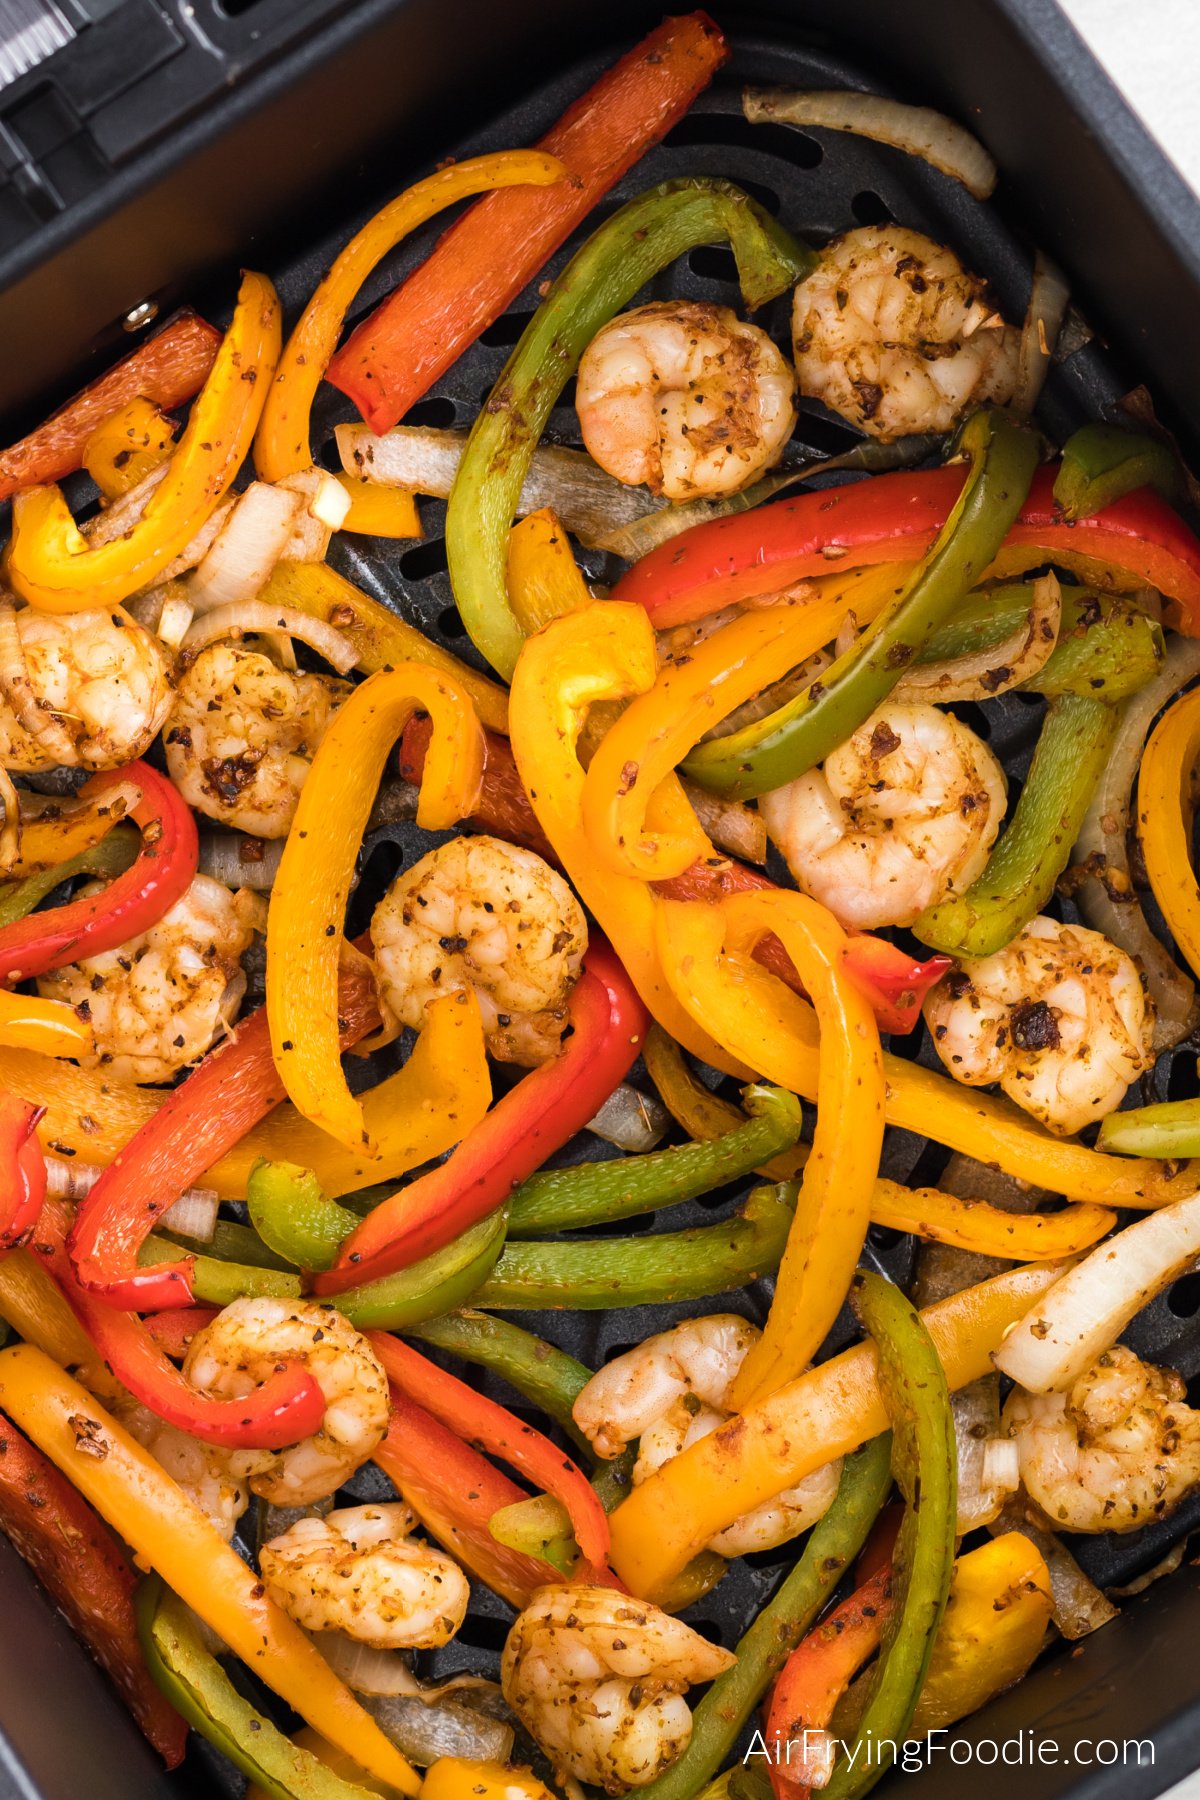 Shrimp, bell peppers, and onions, air fried for shrimp fajitas and in the air fryer basket.